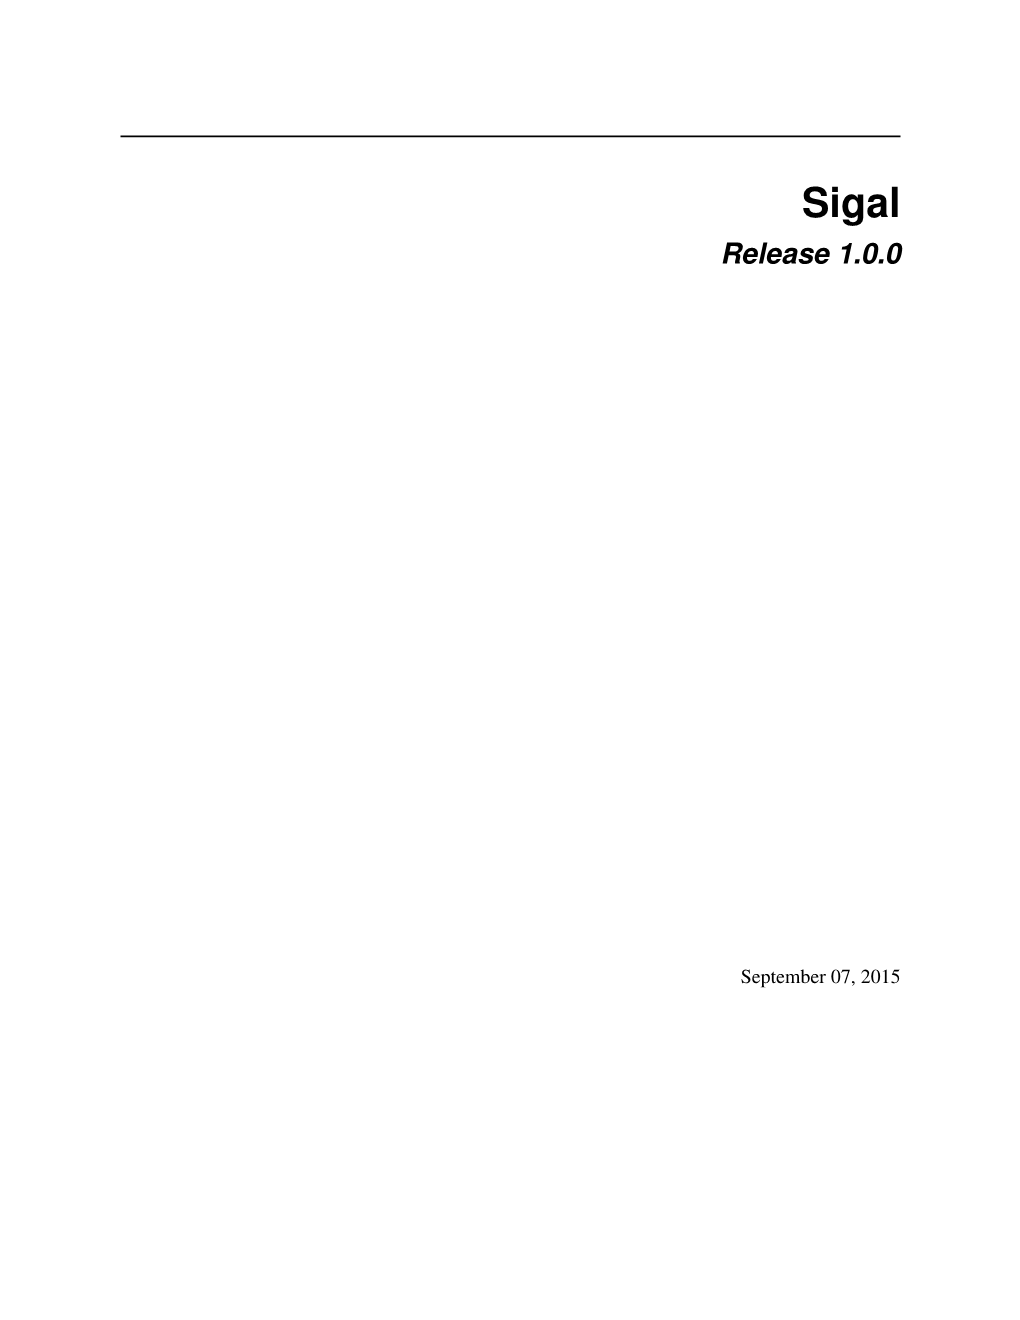 Sigal Release 1.0.0